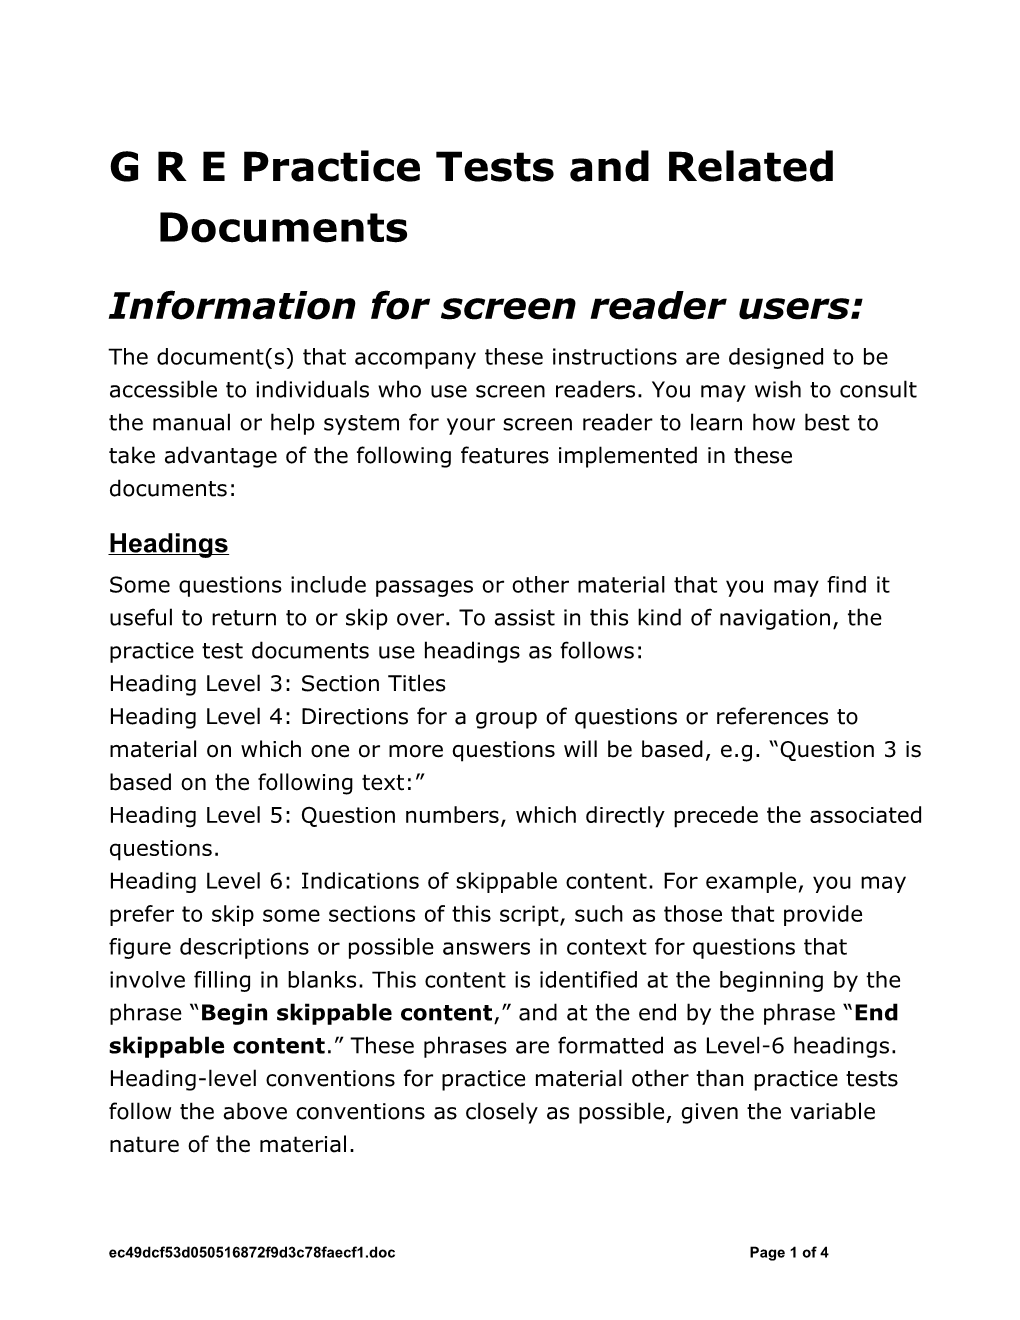 G R E Practice Tests and Related Documents